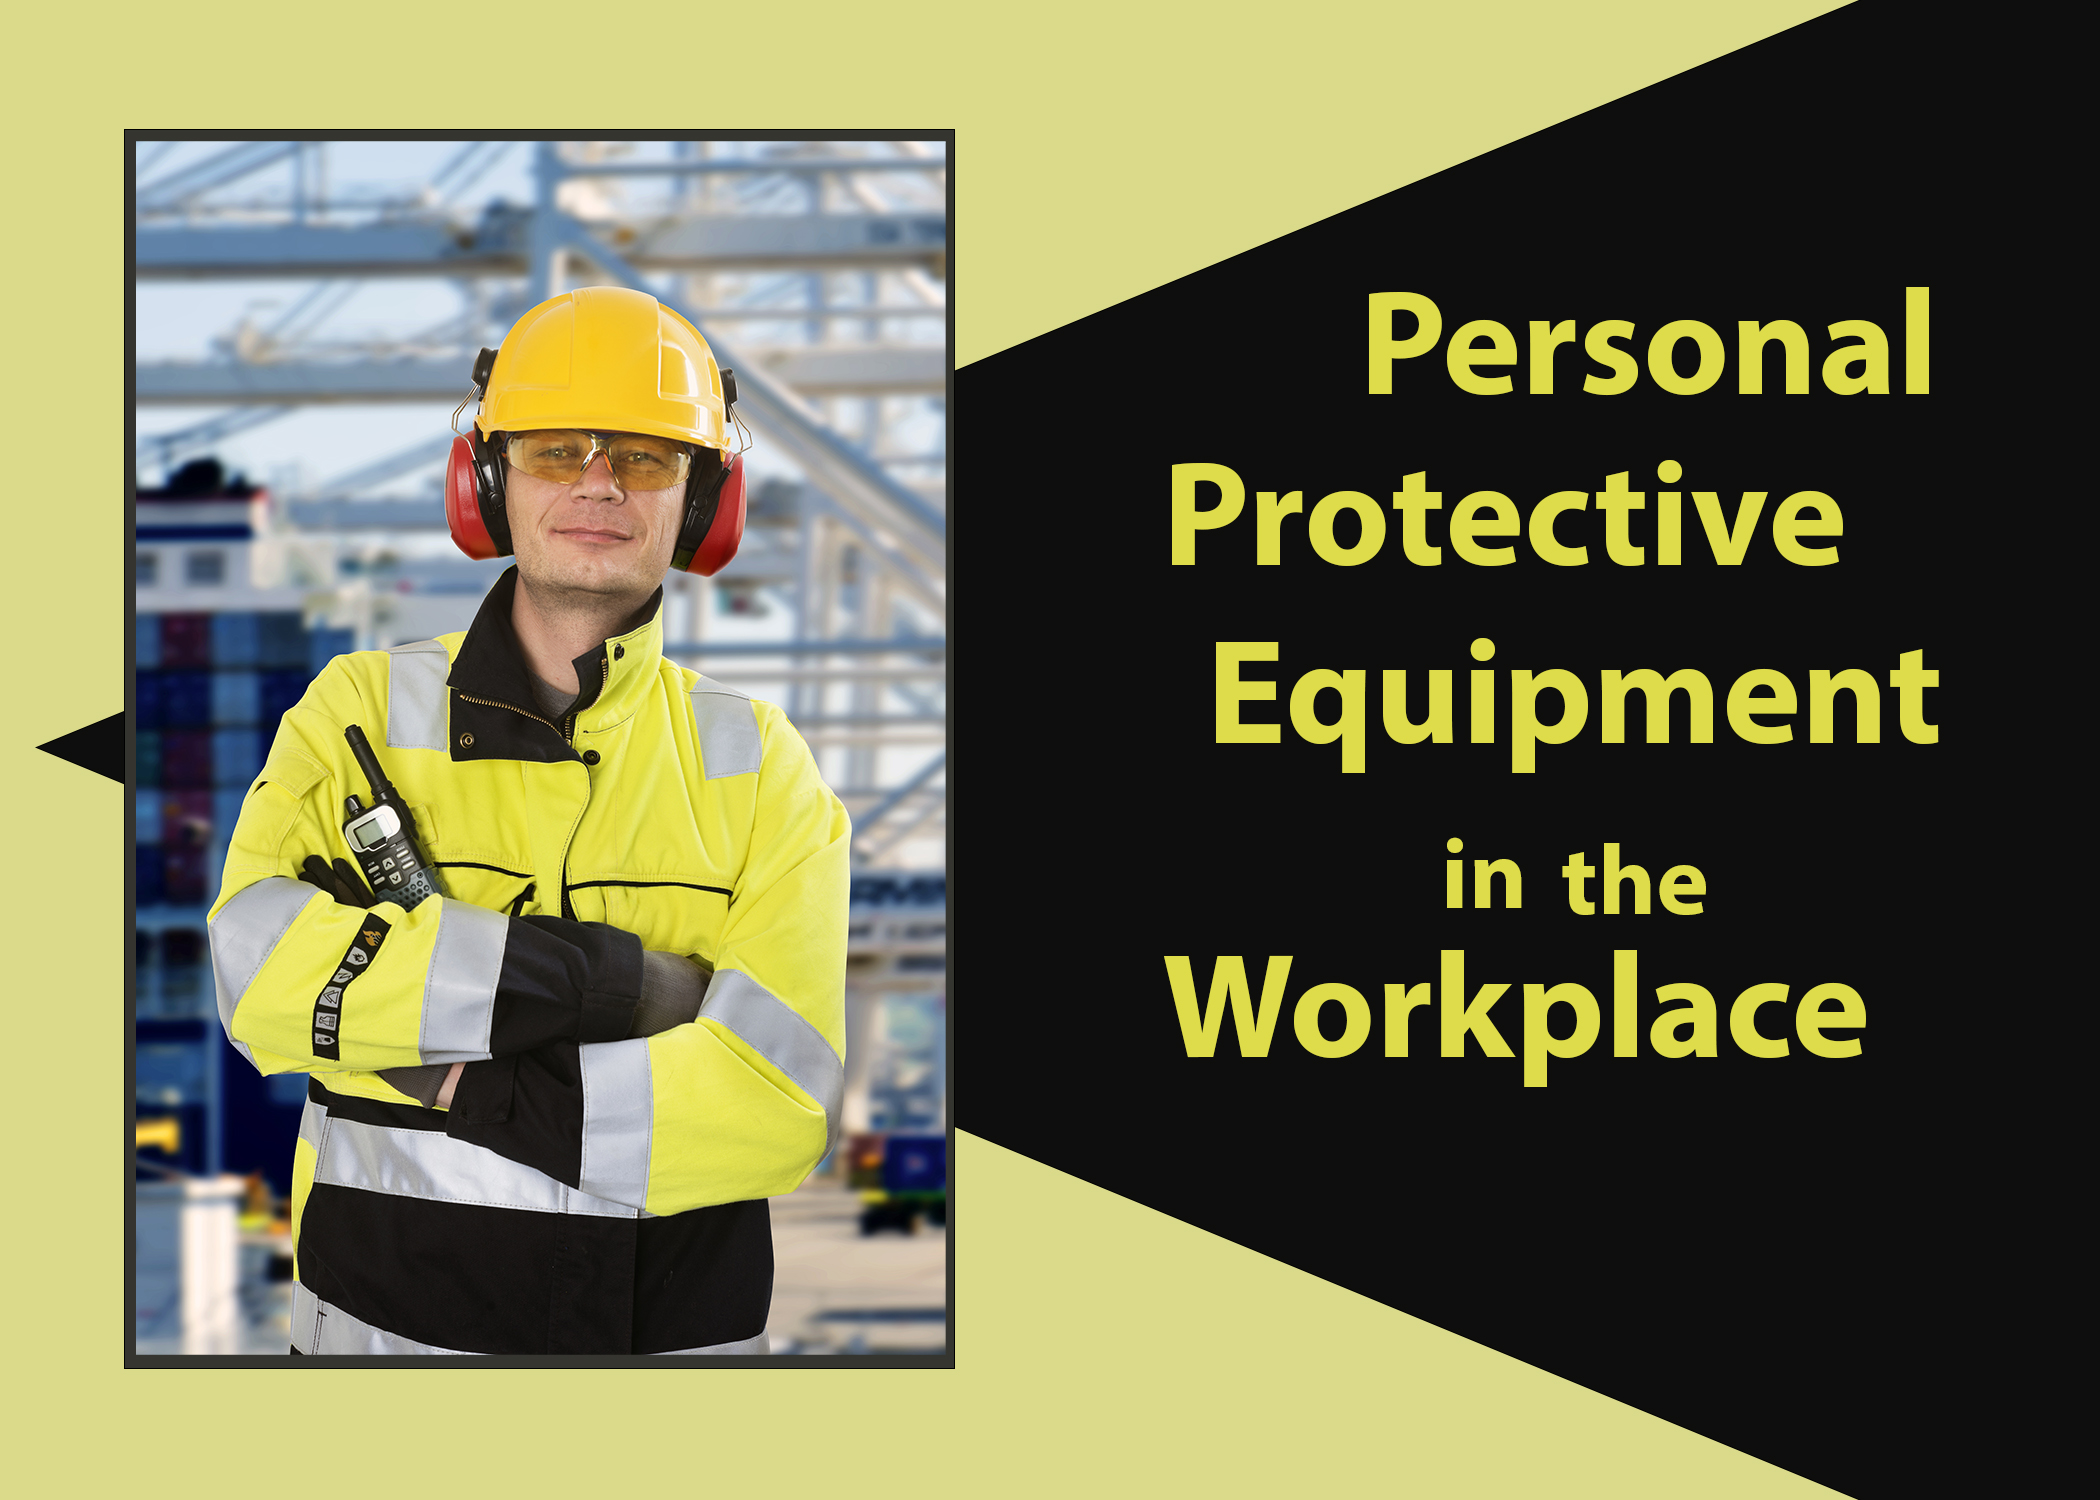 https://www.premiersafety.com/product_images/uploaded_images/ppe-equipment-workplace.jpg